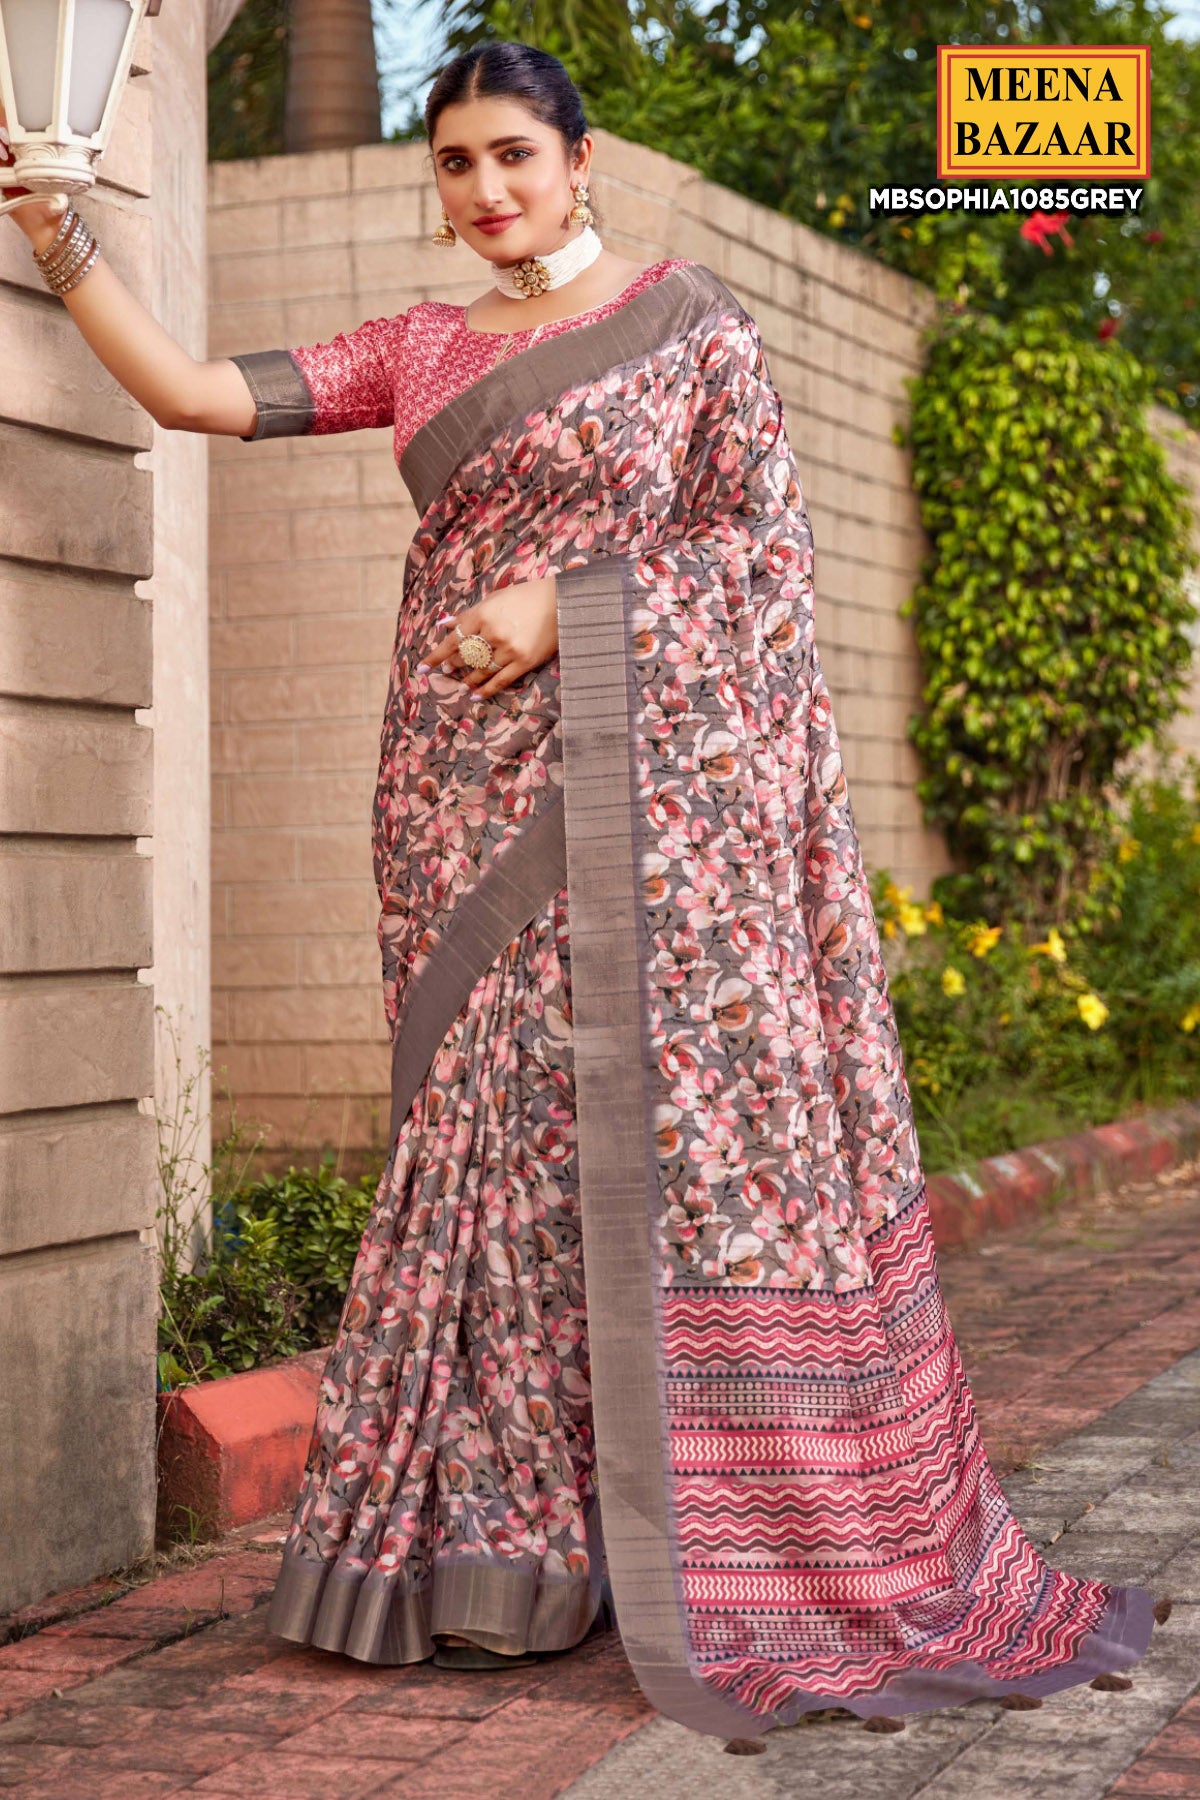 Tussar Blended Cotton Floral Printed Saree